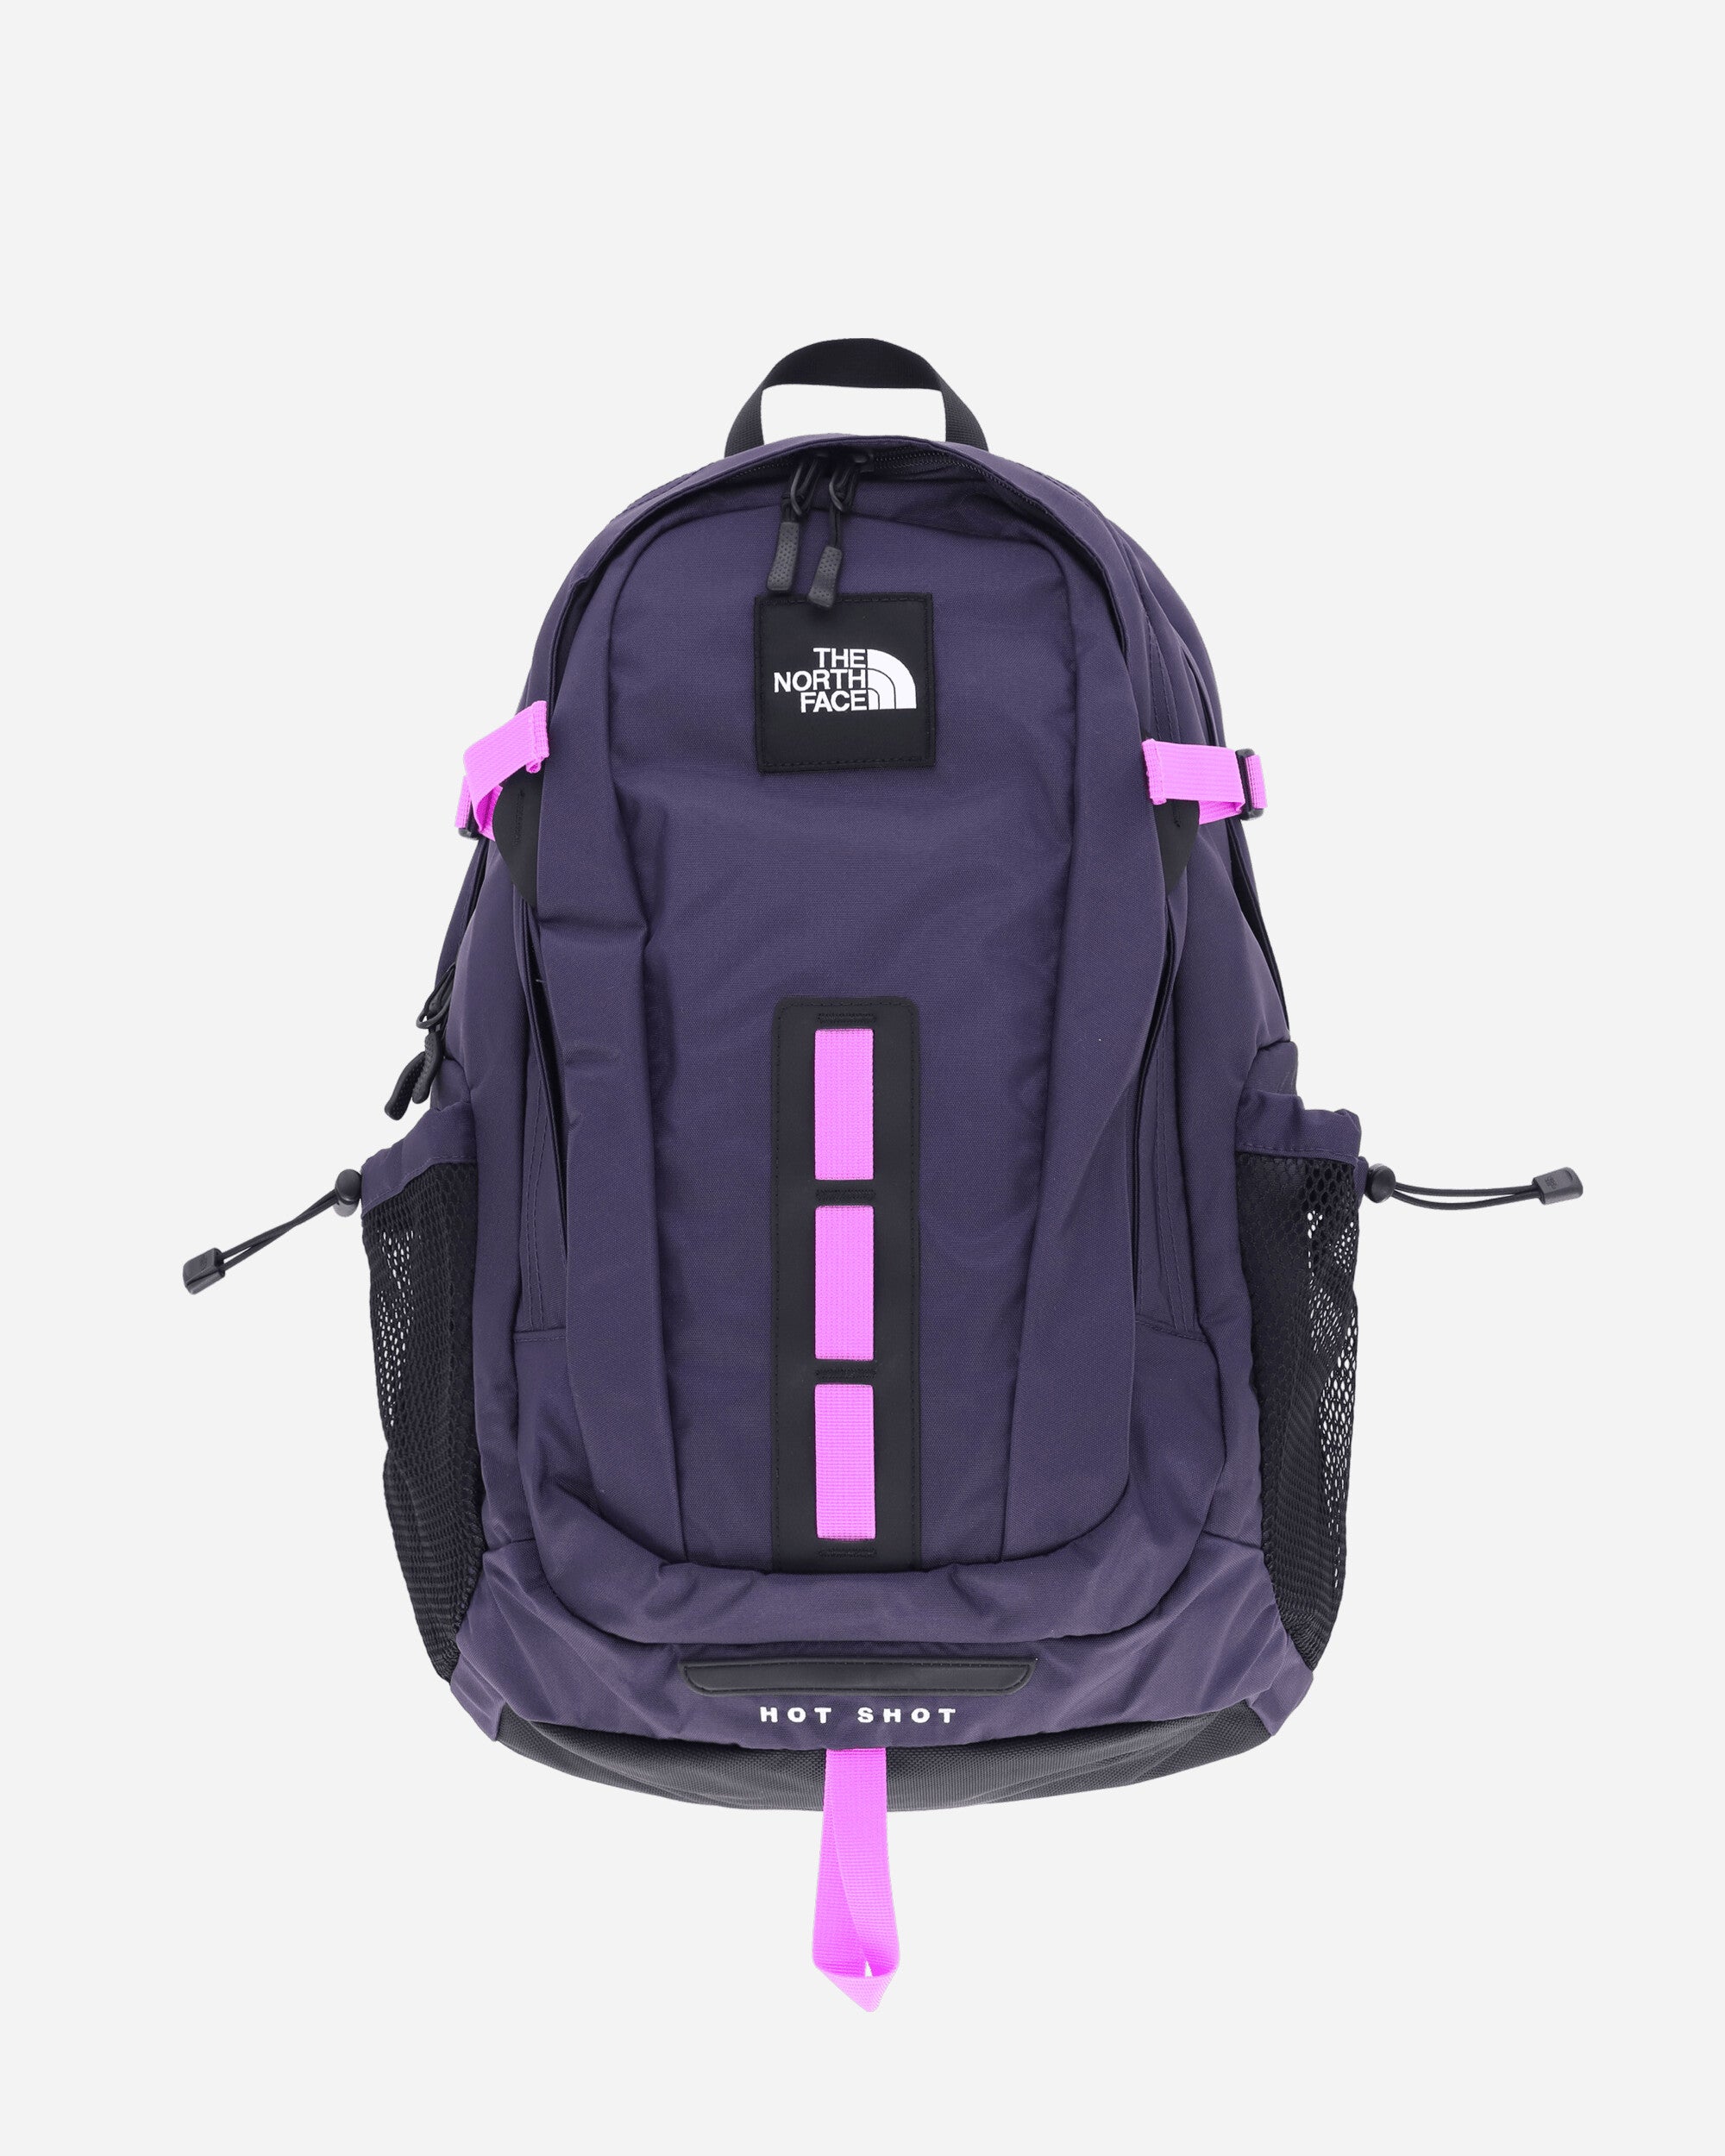 The North Face Hot Shot SE 30L Backpack - Accessories